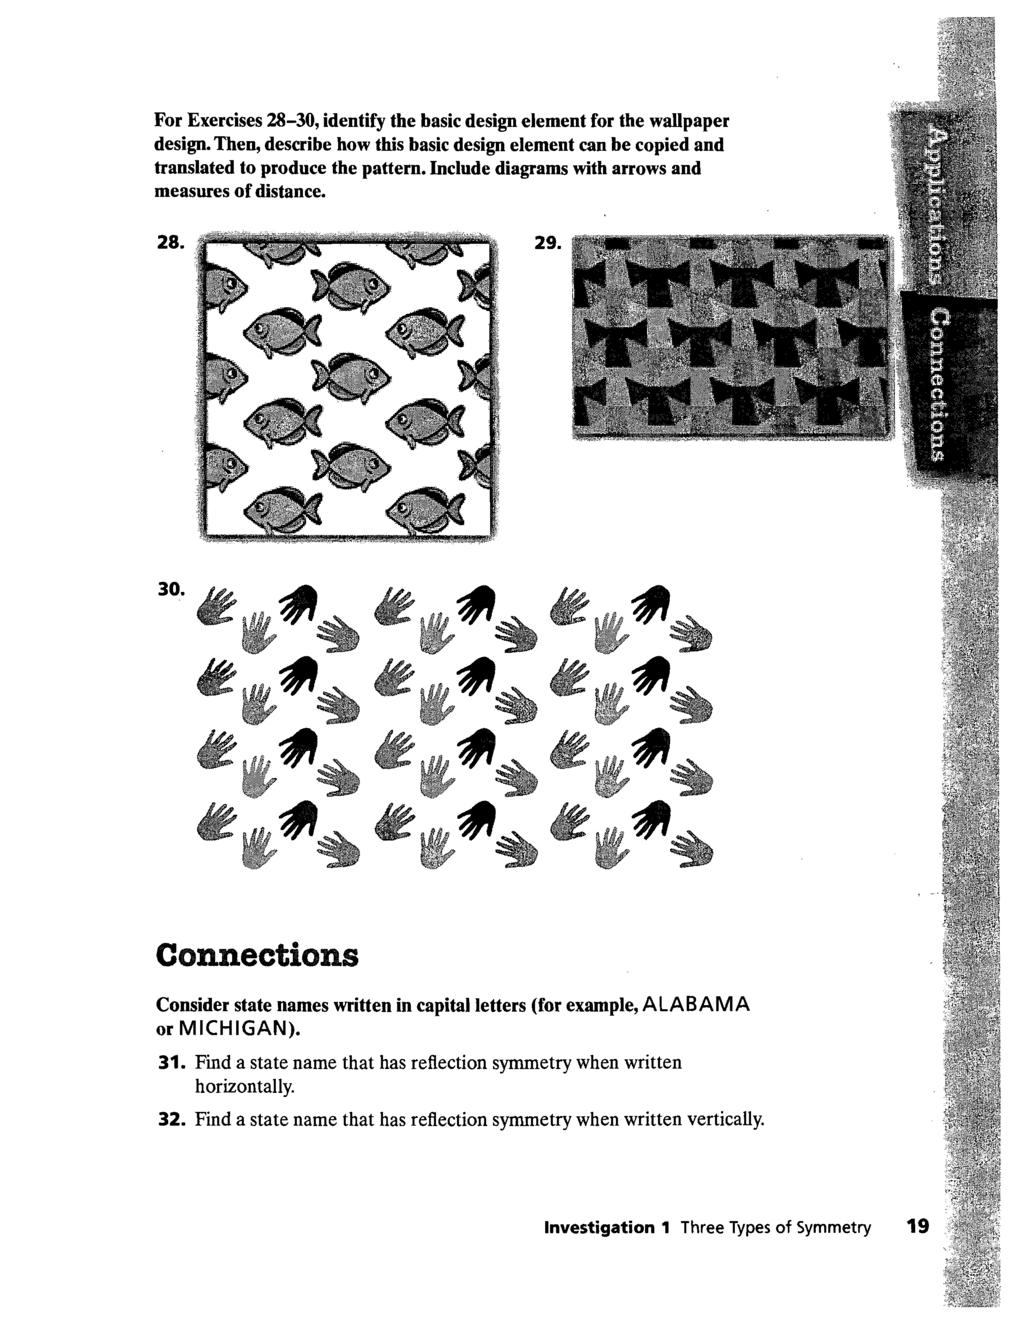 For Exercises 28-30, identify the basic design element for the wallpaper design. Then, describe how this basic design element can be copied and translated to produce the pattern.